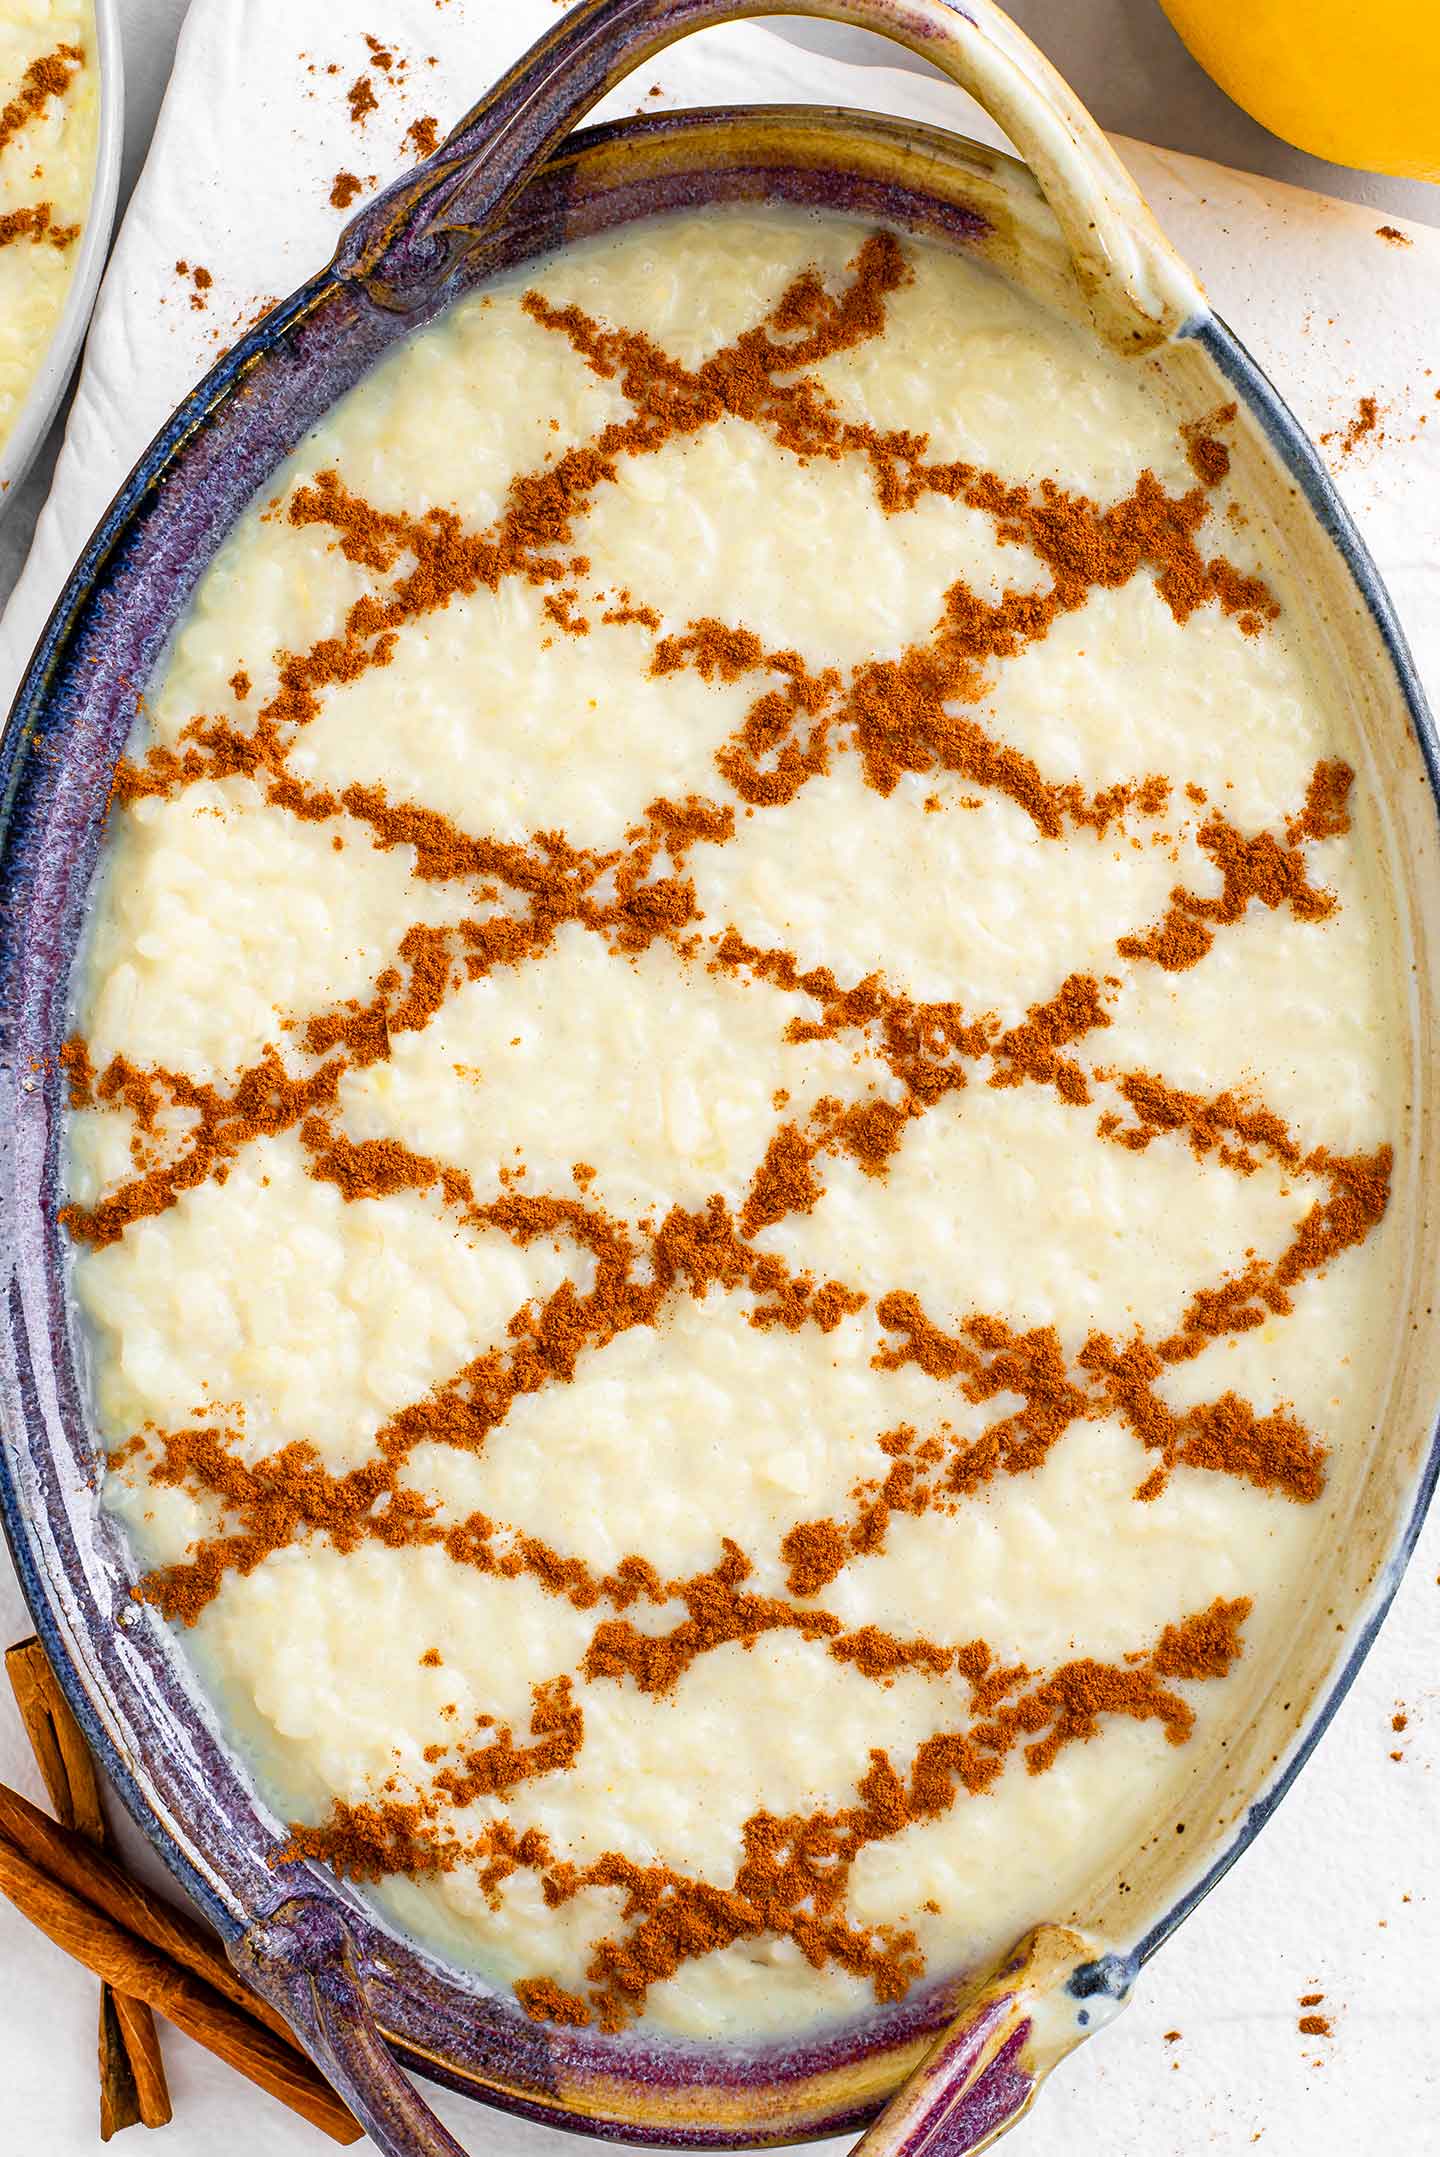 Top down view of Portuguese sweet rice in an oval dish decorated with a cinnamon criss cross pattern.